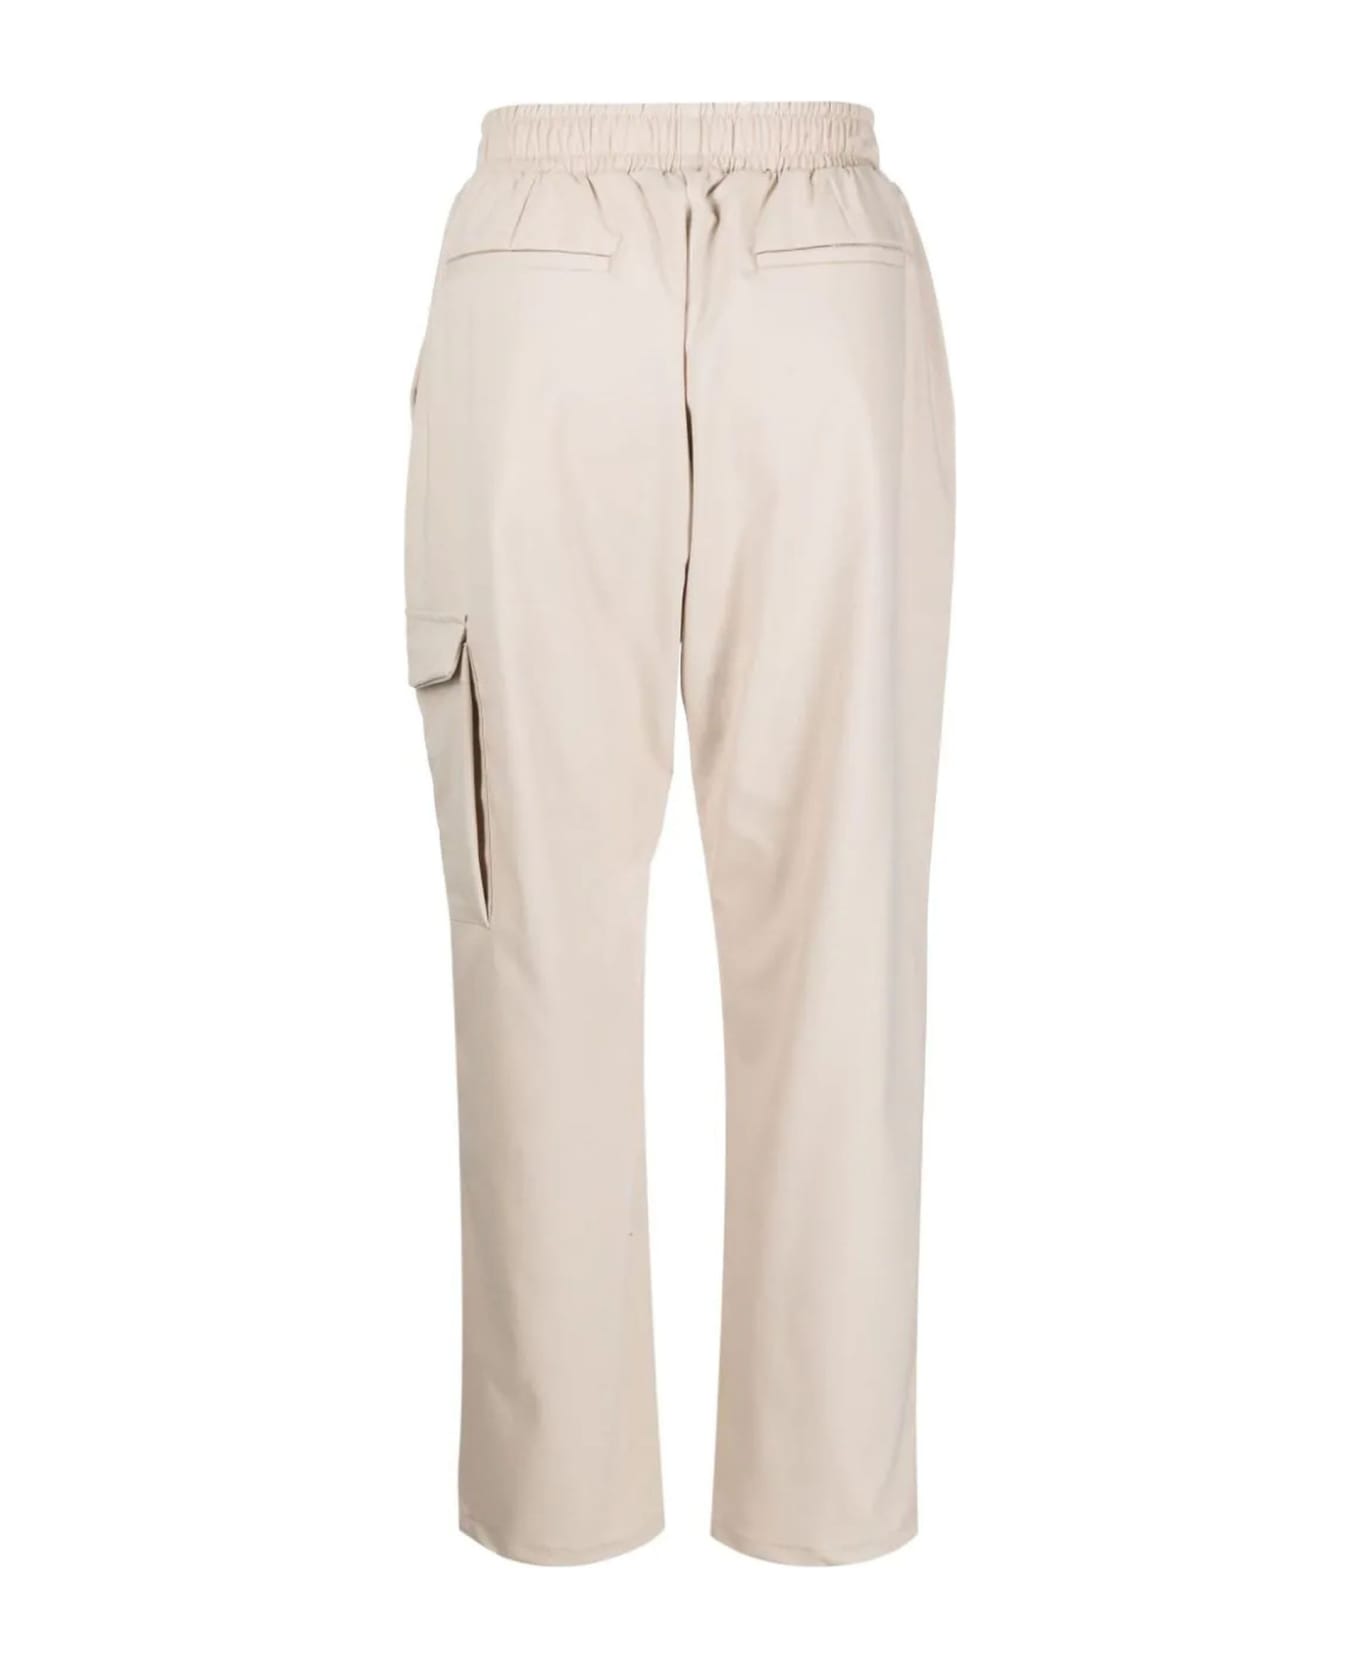 Family First Milano Light Beige Wool Blend Trousers - NEUTRALS